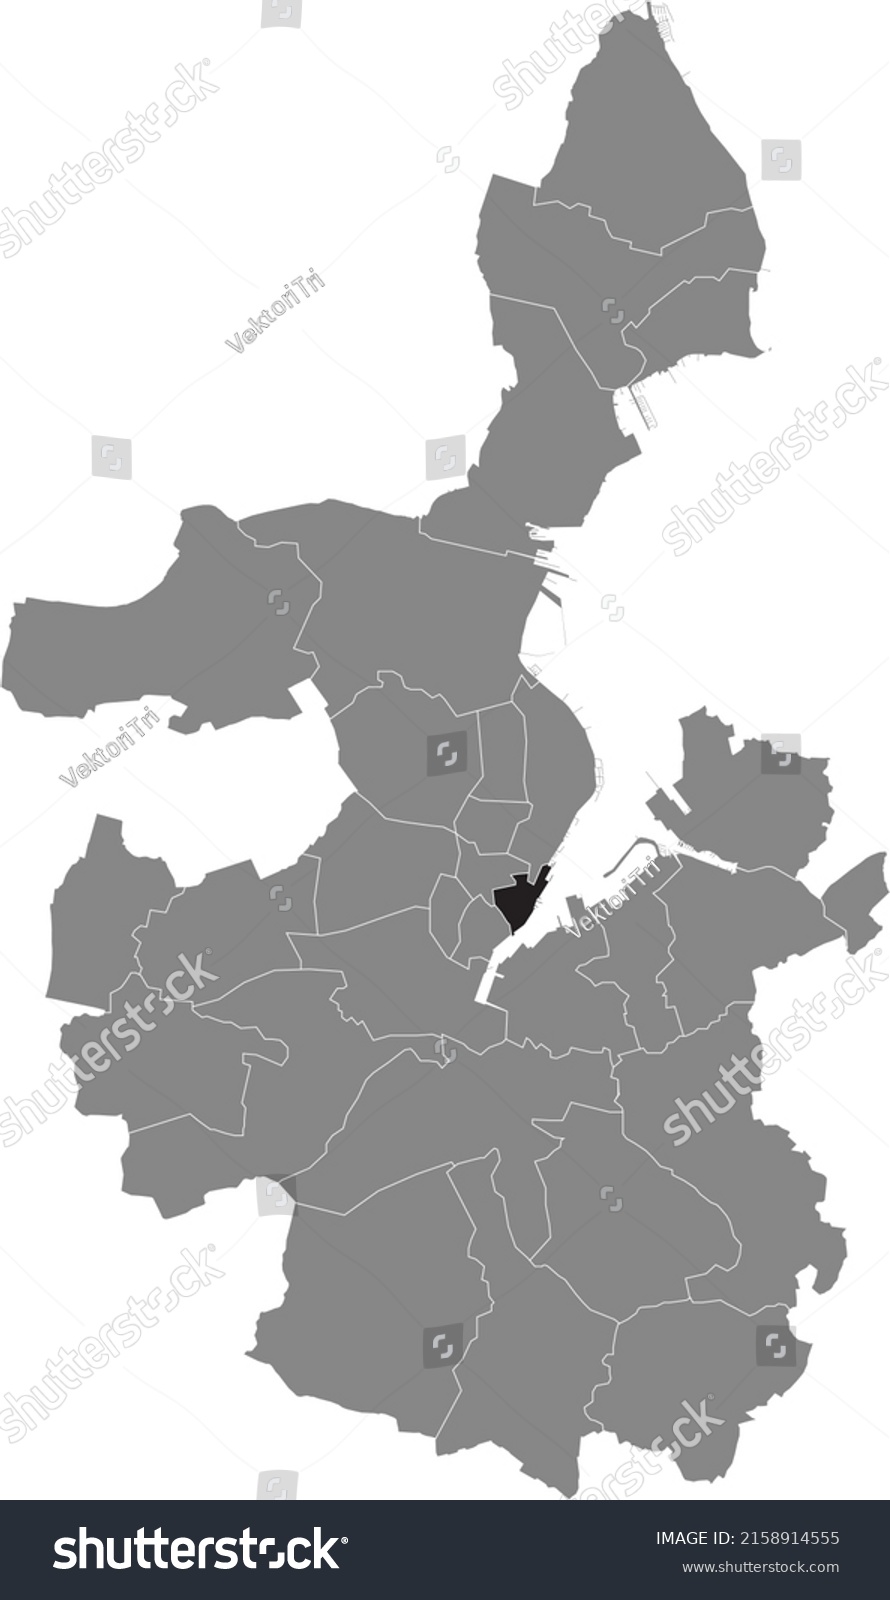 SVG of Black flat blank highlighted location map of the 
ALTSTADT DISTRICT inside gray administrative map of Kiel, Germany svg